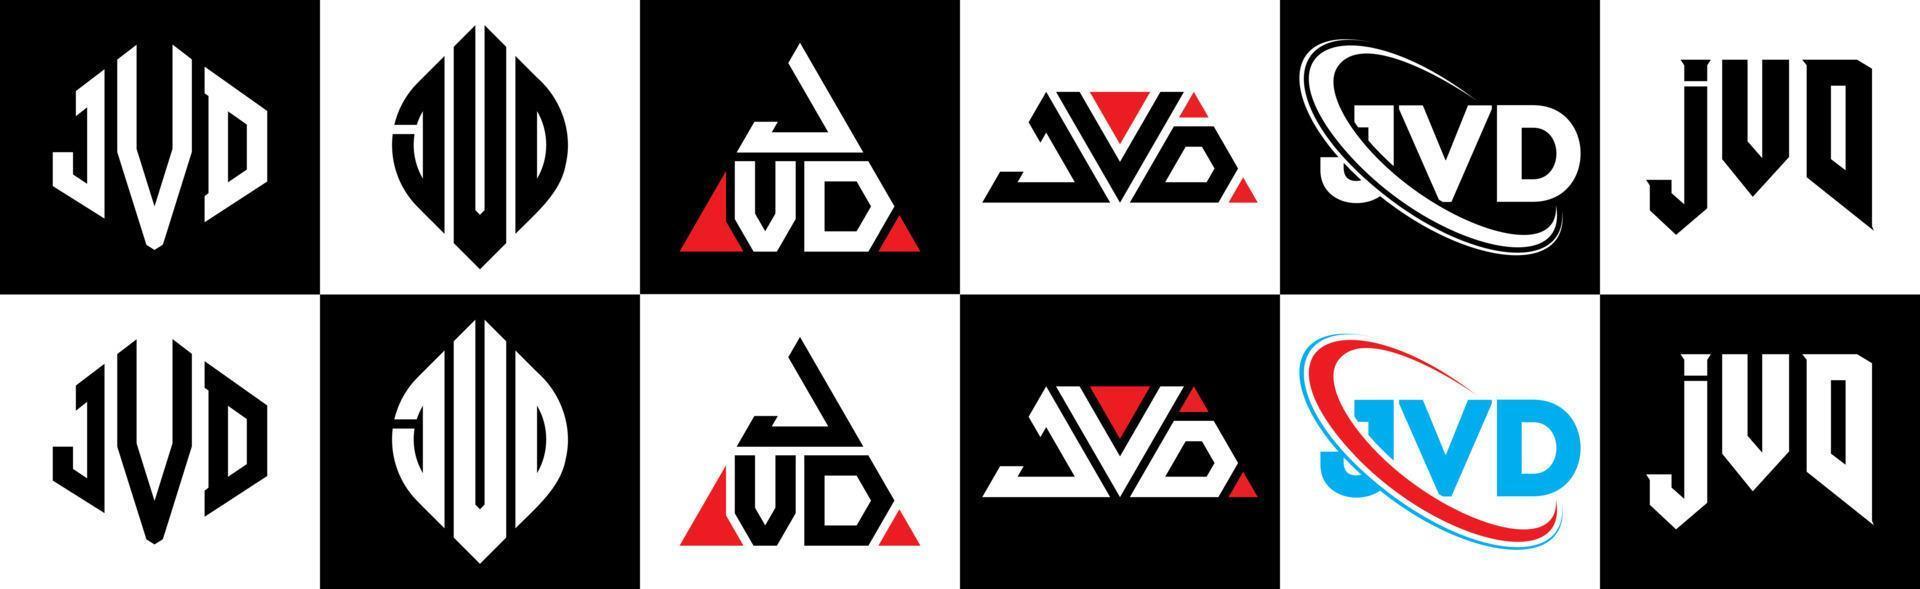 JVD letter logo design in six style. JVD polygon, circle, triangle, hexagon, flat and simple style with black and white color variation letter logo set in one artboard. JVD minimalist and classic logo vector